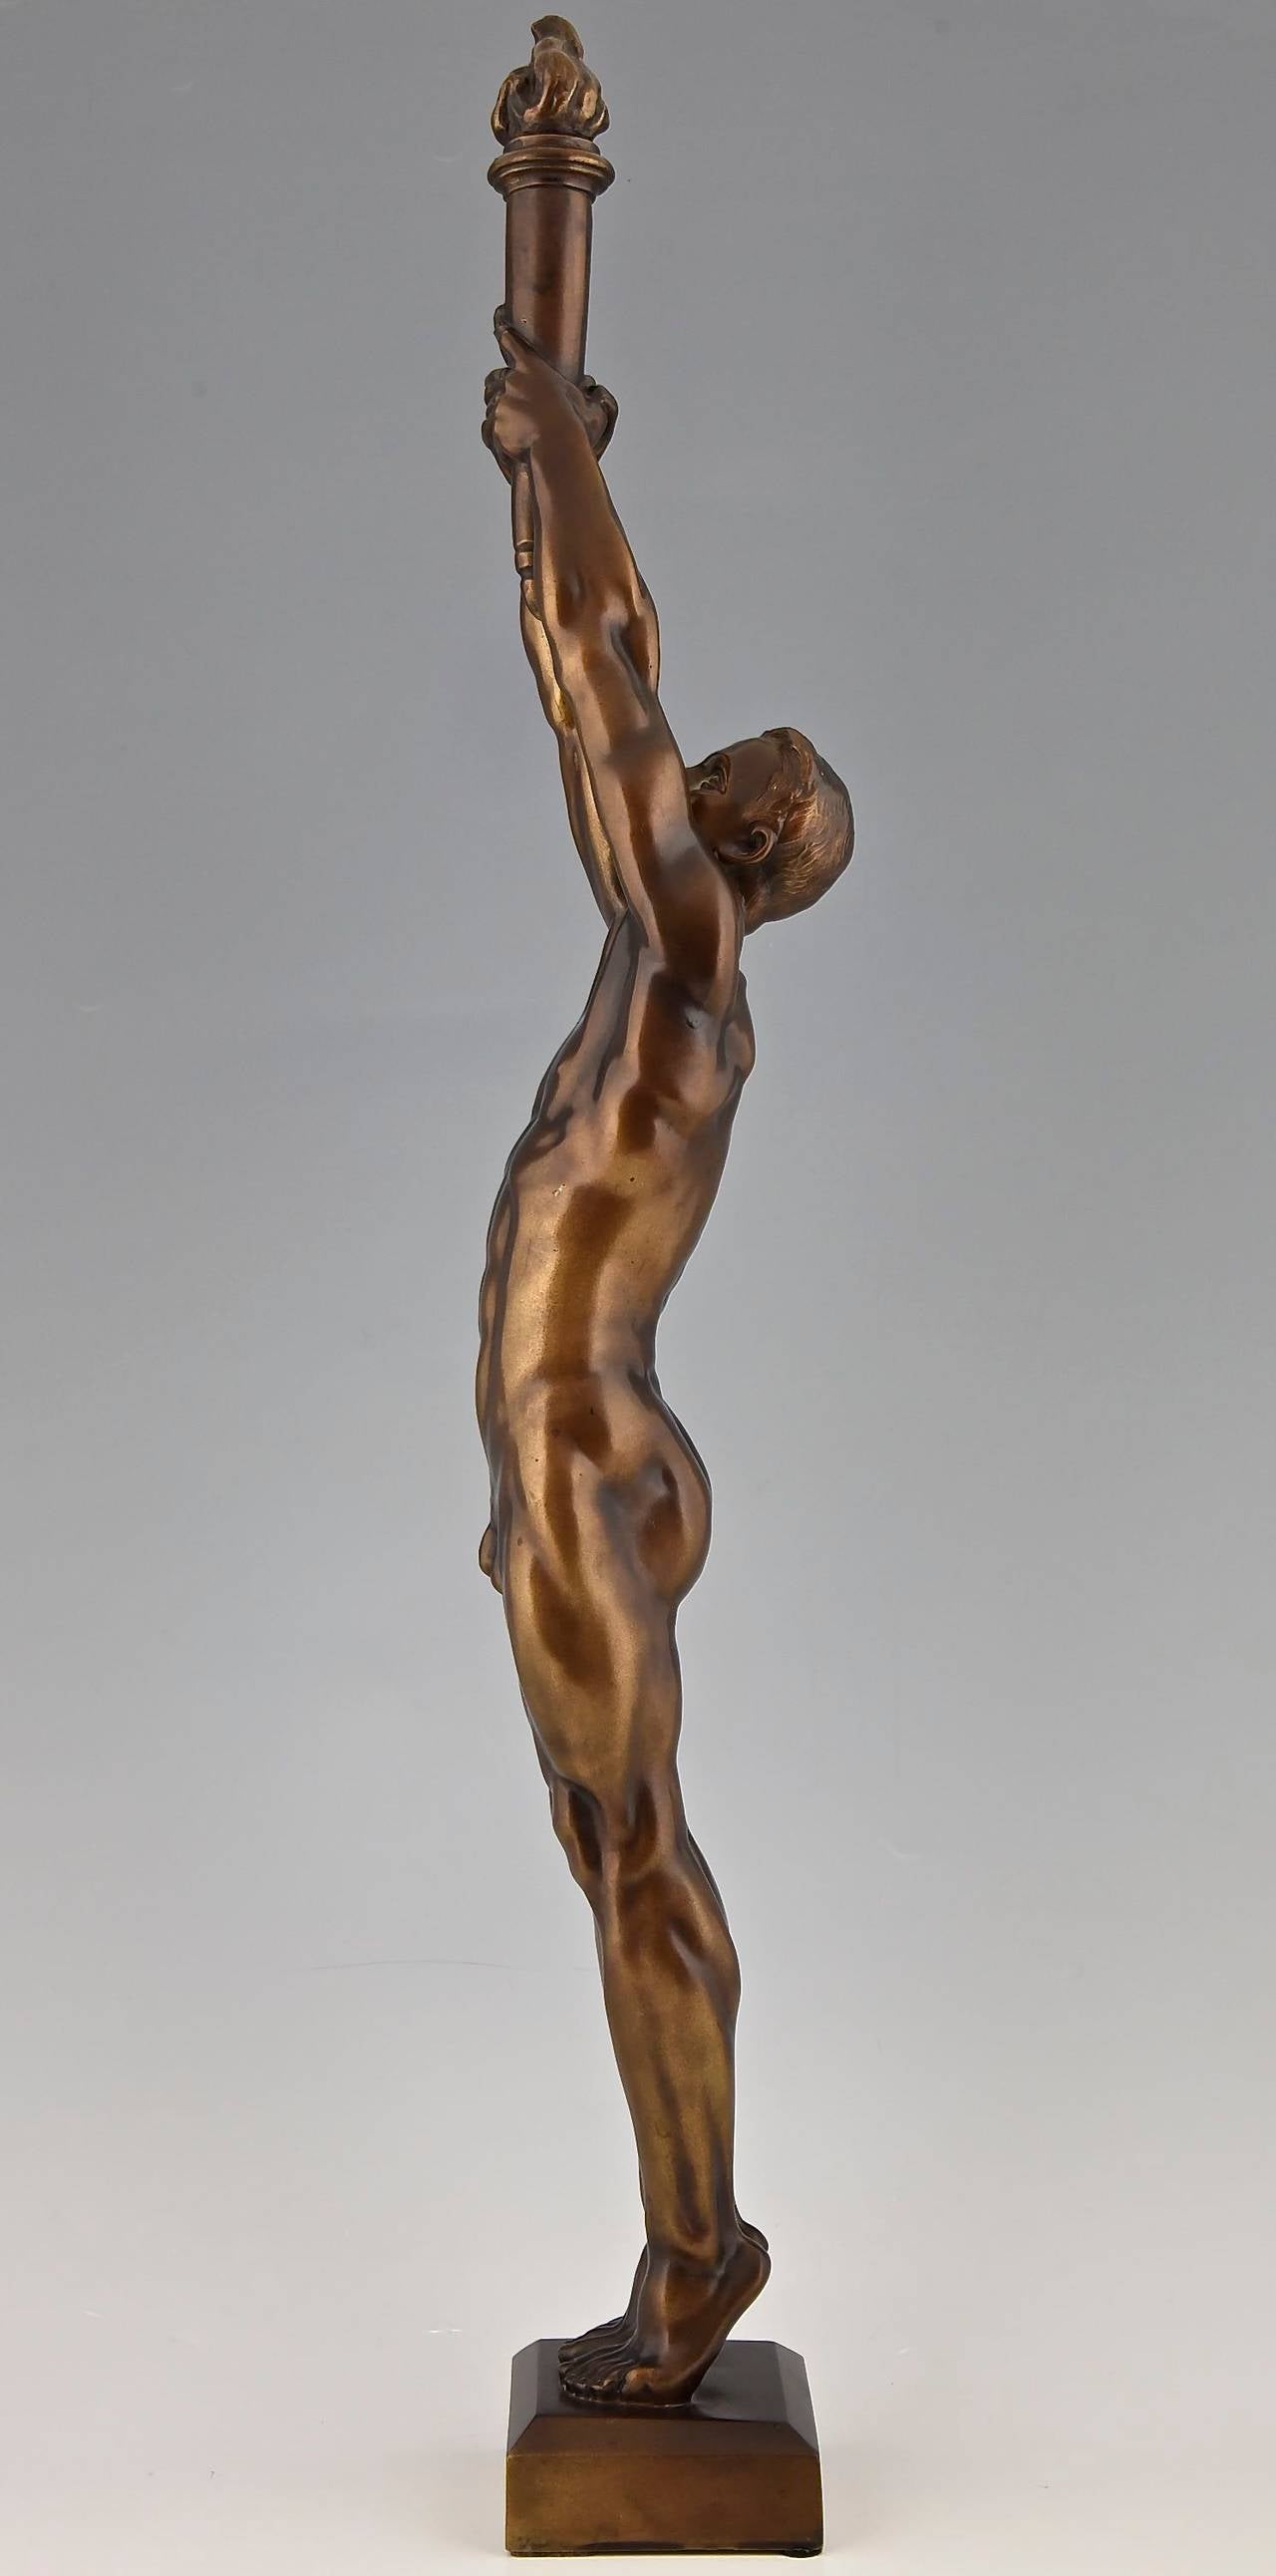 French Bronze Sculpture of a Male Nude with Torch by A. Puttemans, Belgium, 1912